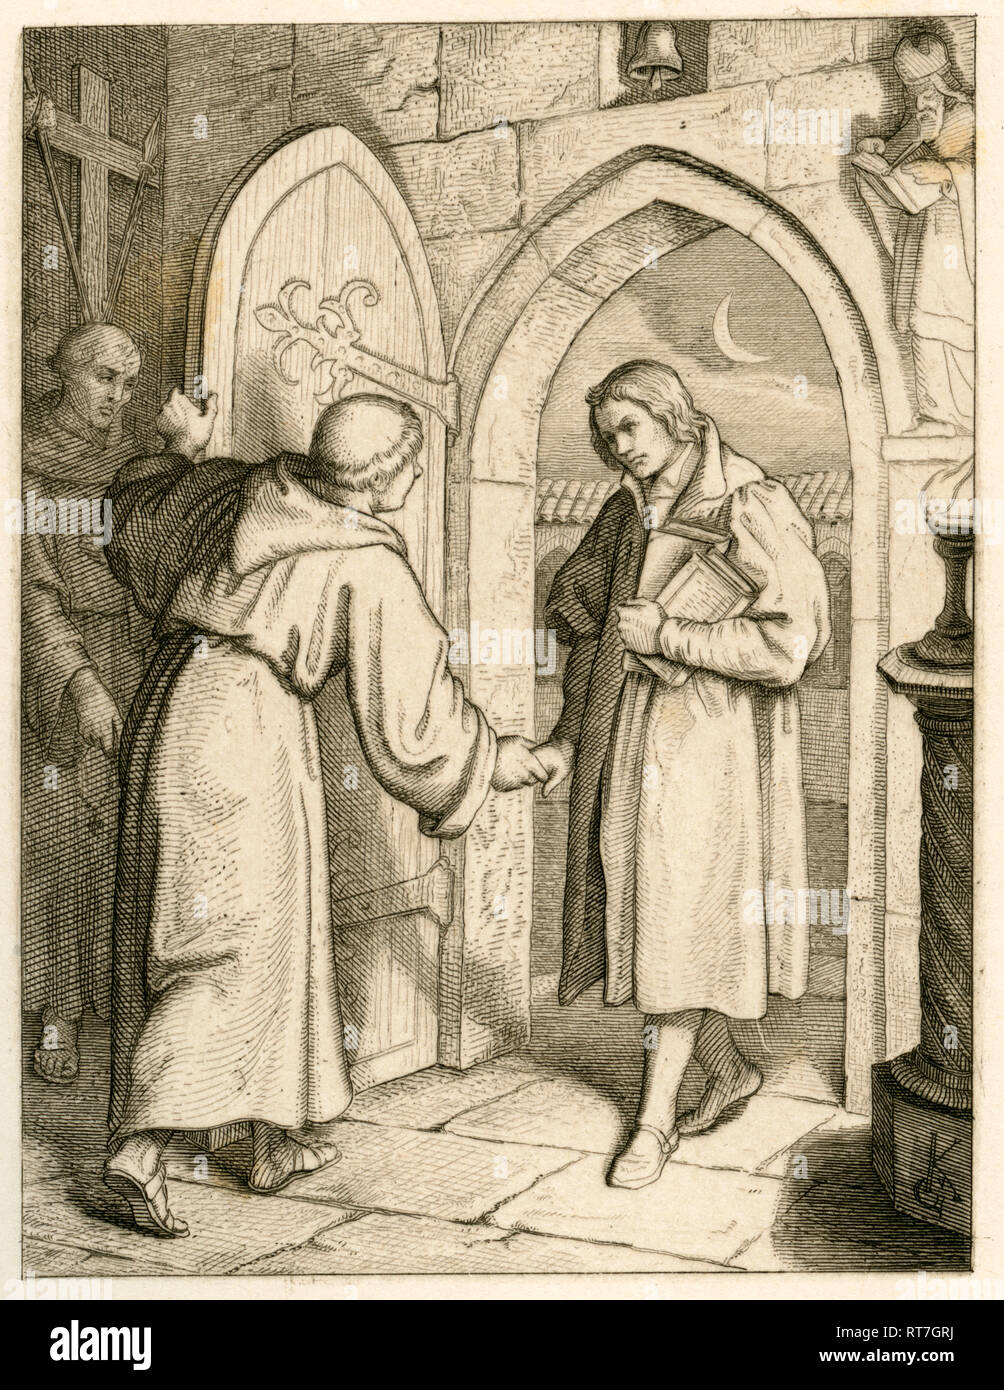 Martin Luther entered a Augustinian monastery in Erfurt, 10. 07. 1505. Illustration from: 'Dr. Martin Luther the German Reformer', illustrated by Gustav König, published by Rudolf Besser, Gotha, 1850th., Additional-Rights-Clearance-Info-Not-Available Stock Photo